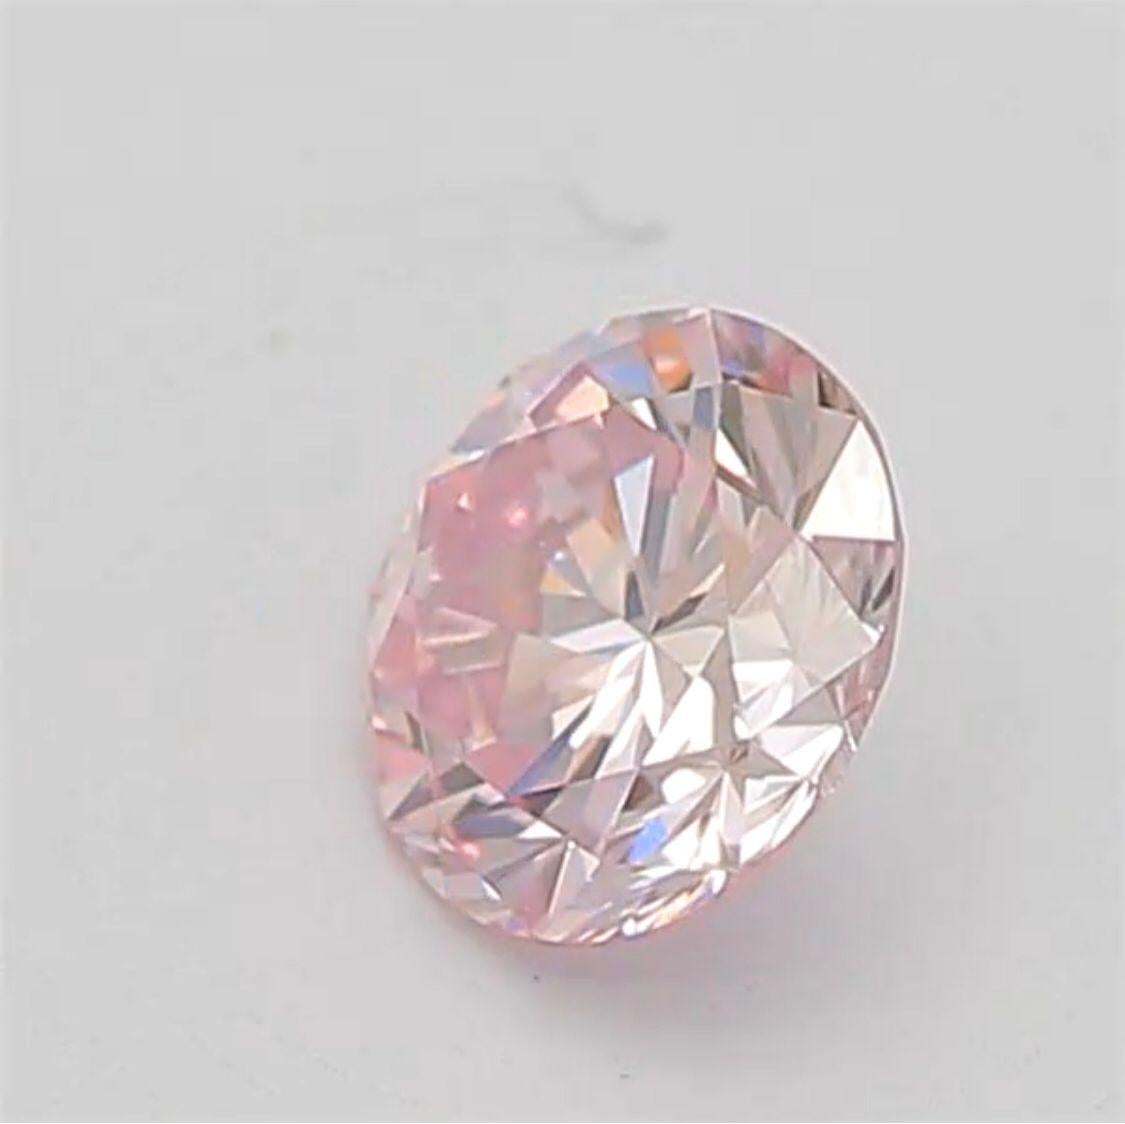 0.20 Carat Very Light Pink Round Shaped Diamond VS1 Clarity CGL Certified For Sale 6